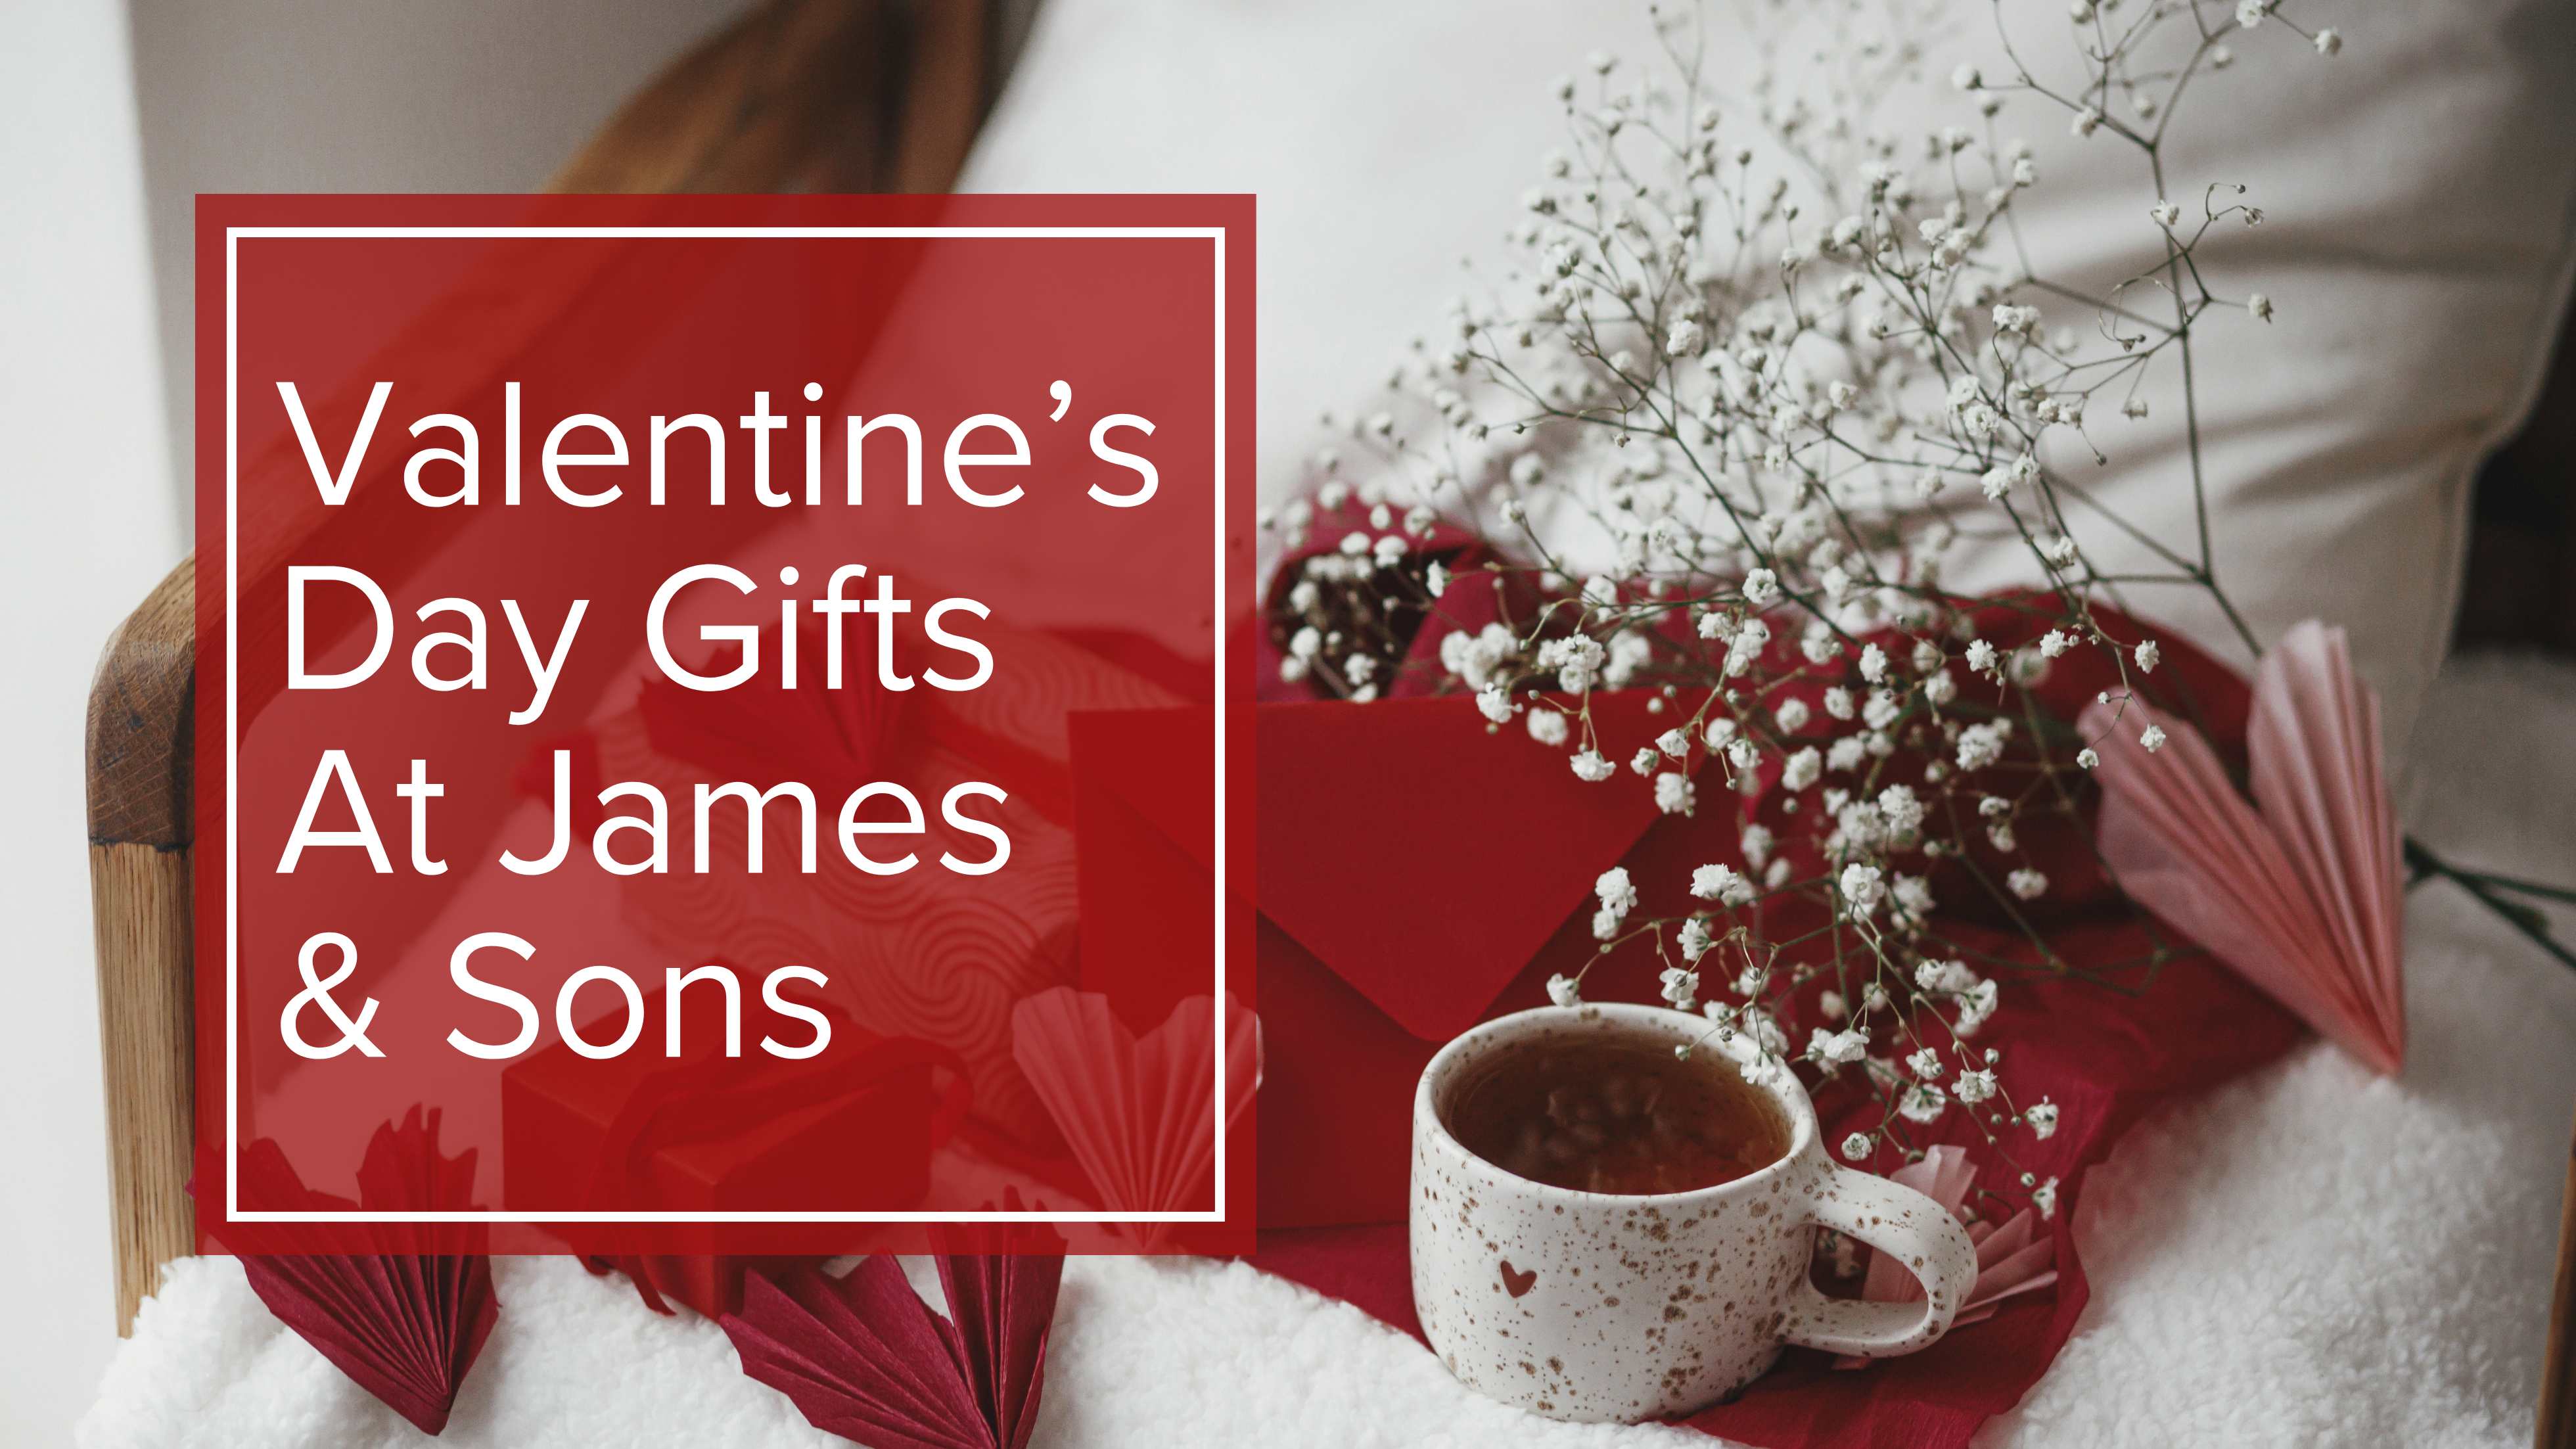 Valentine's Day Gifts at James & Sons